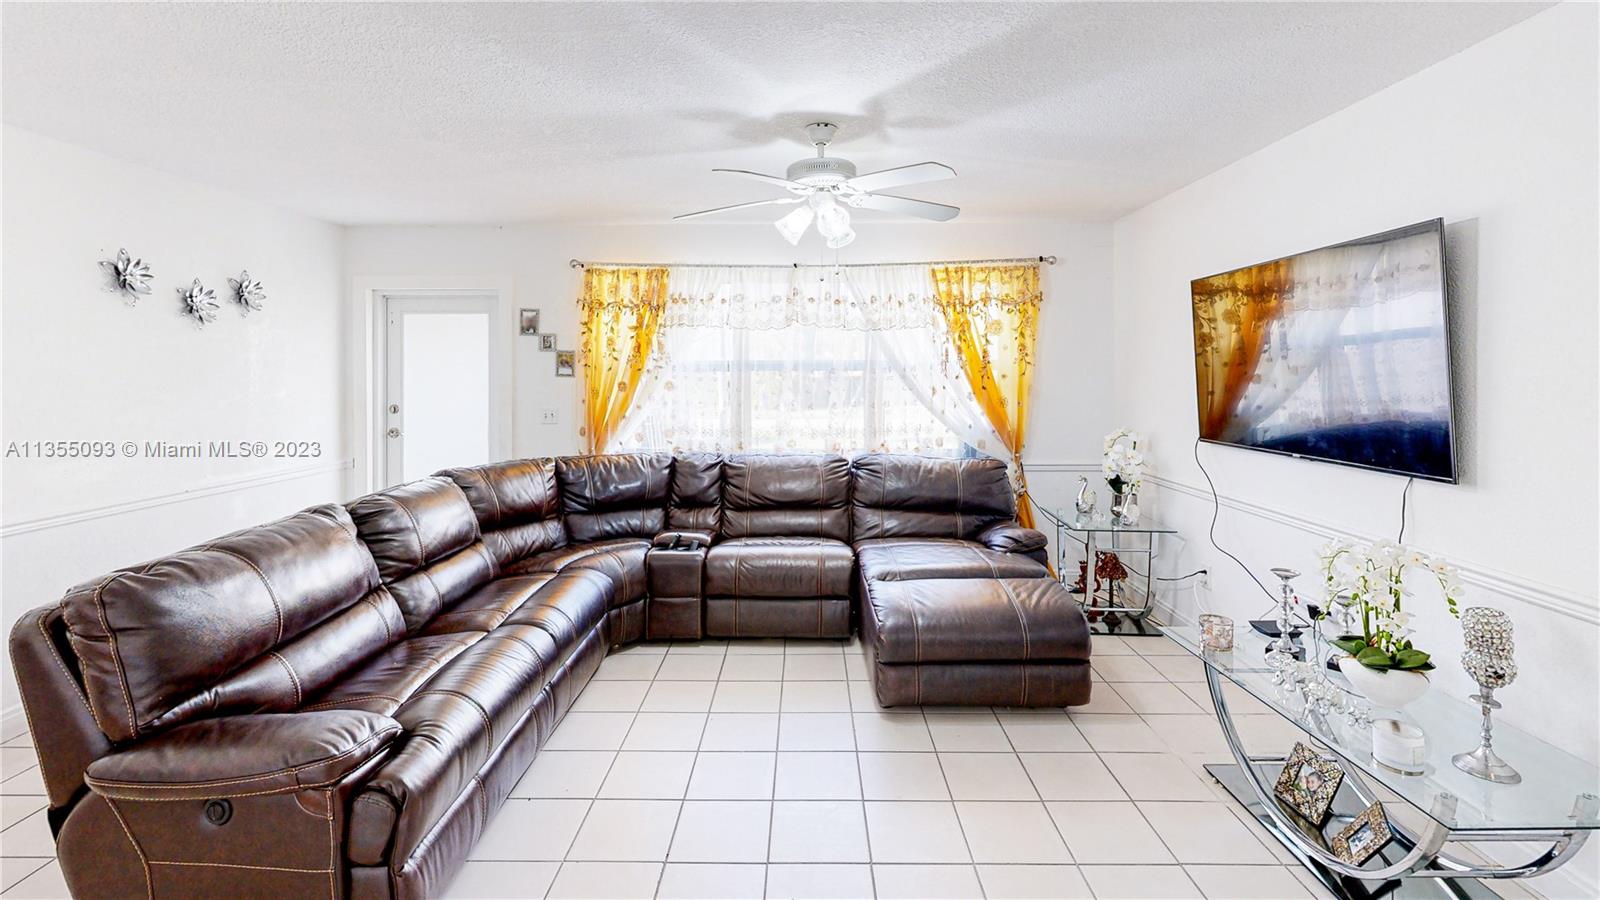 House in Homestead, Florida 11623945